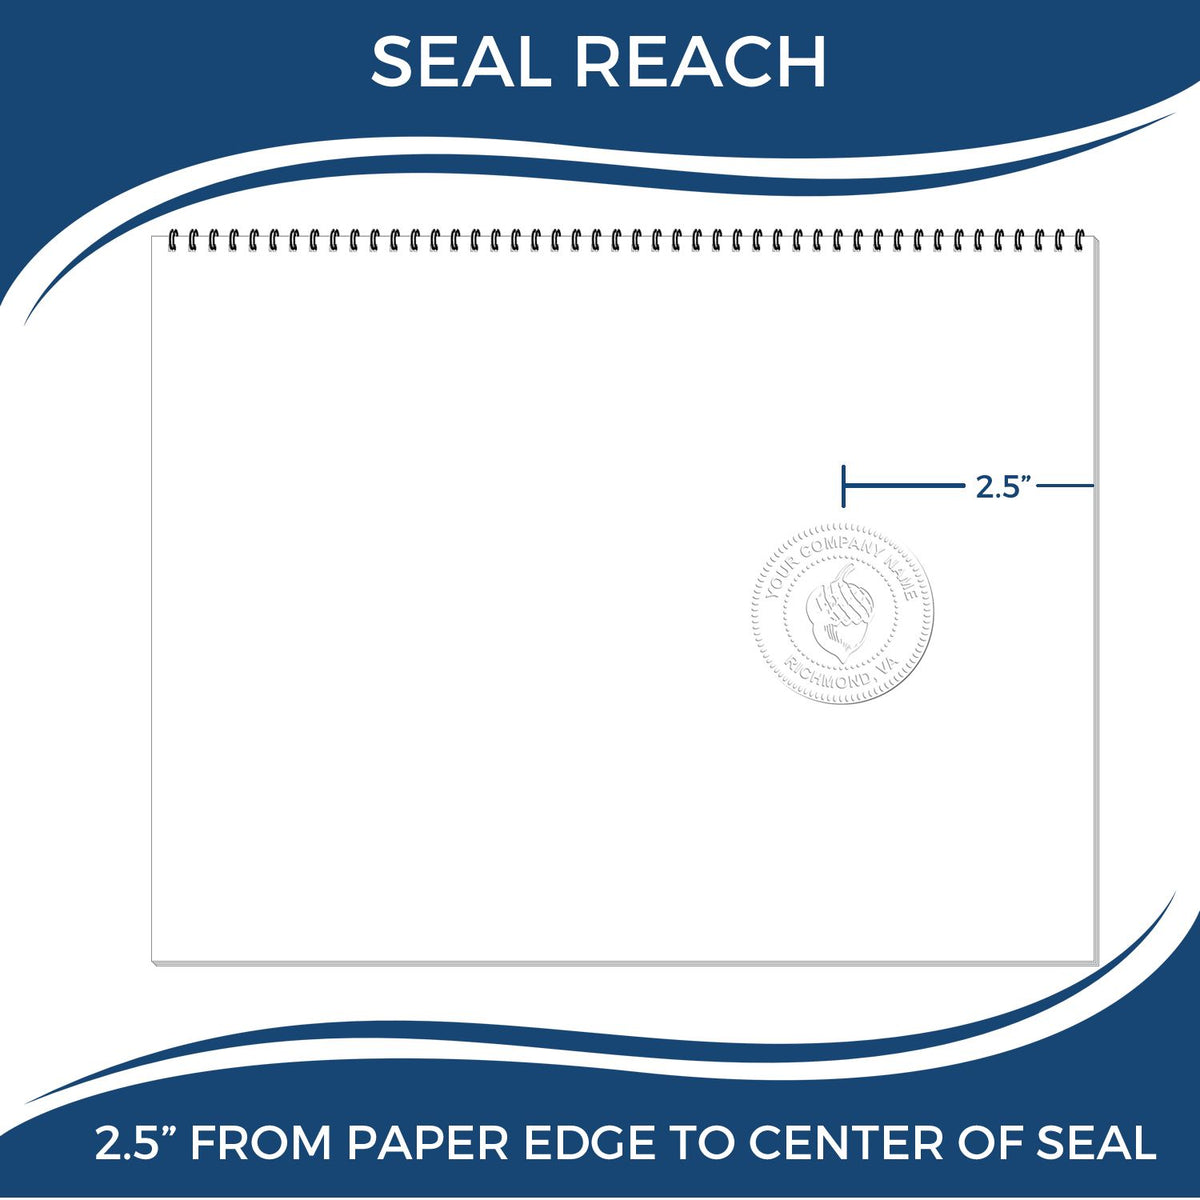 An infographic showing the seal reach which is represented by a ruler and a miniature seal image of the Heavy Duty Cast Iron North Carolina Engineer Seal Embosser